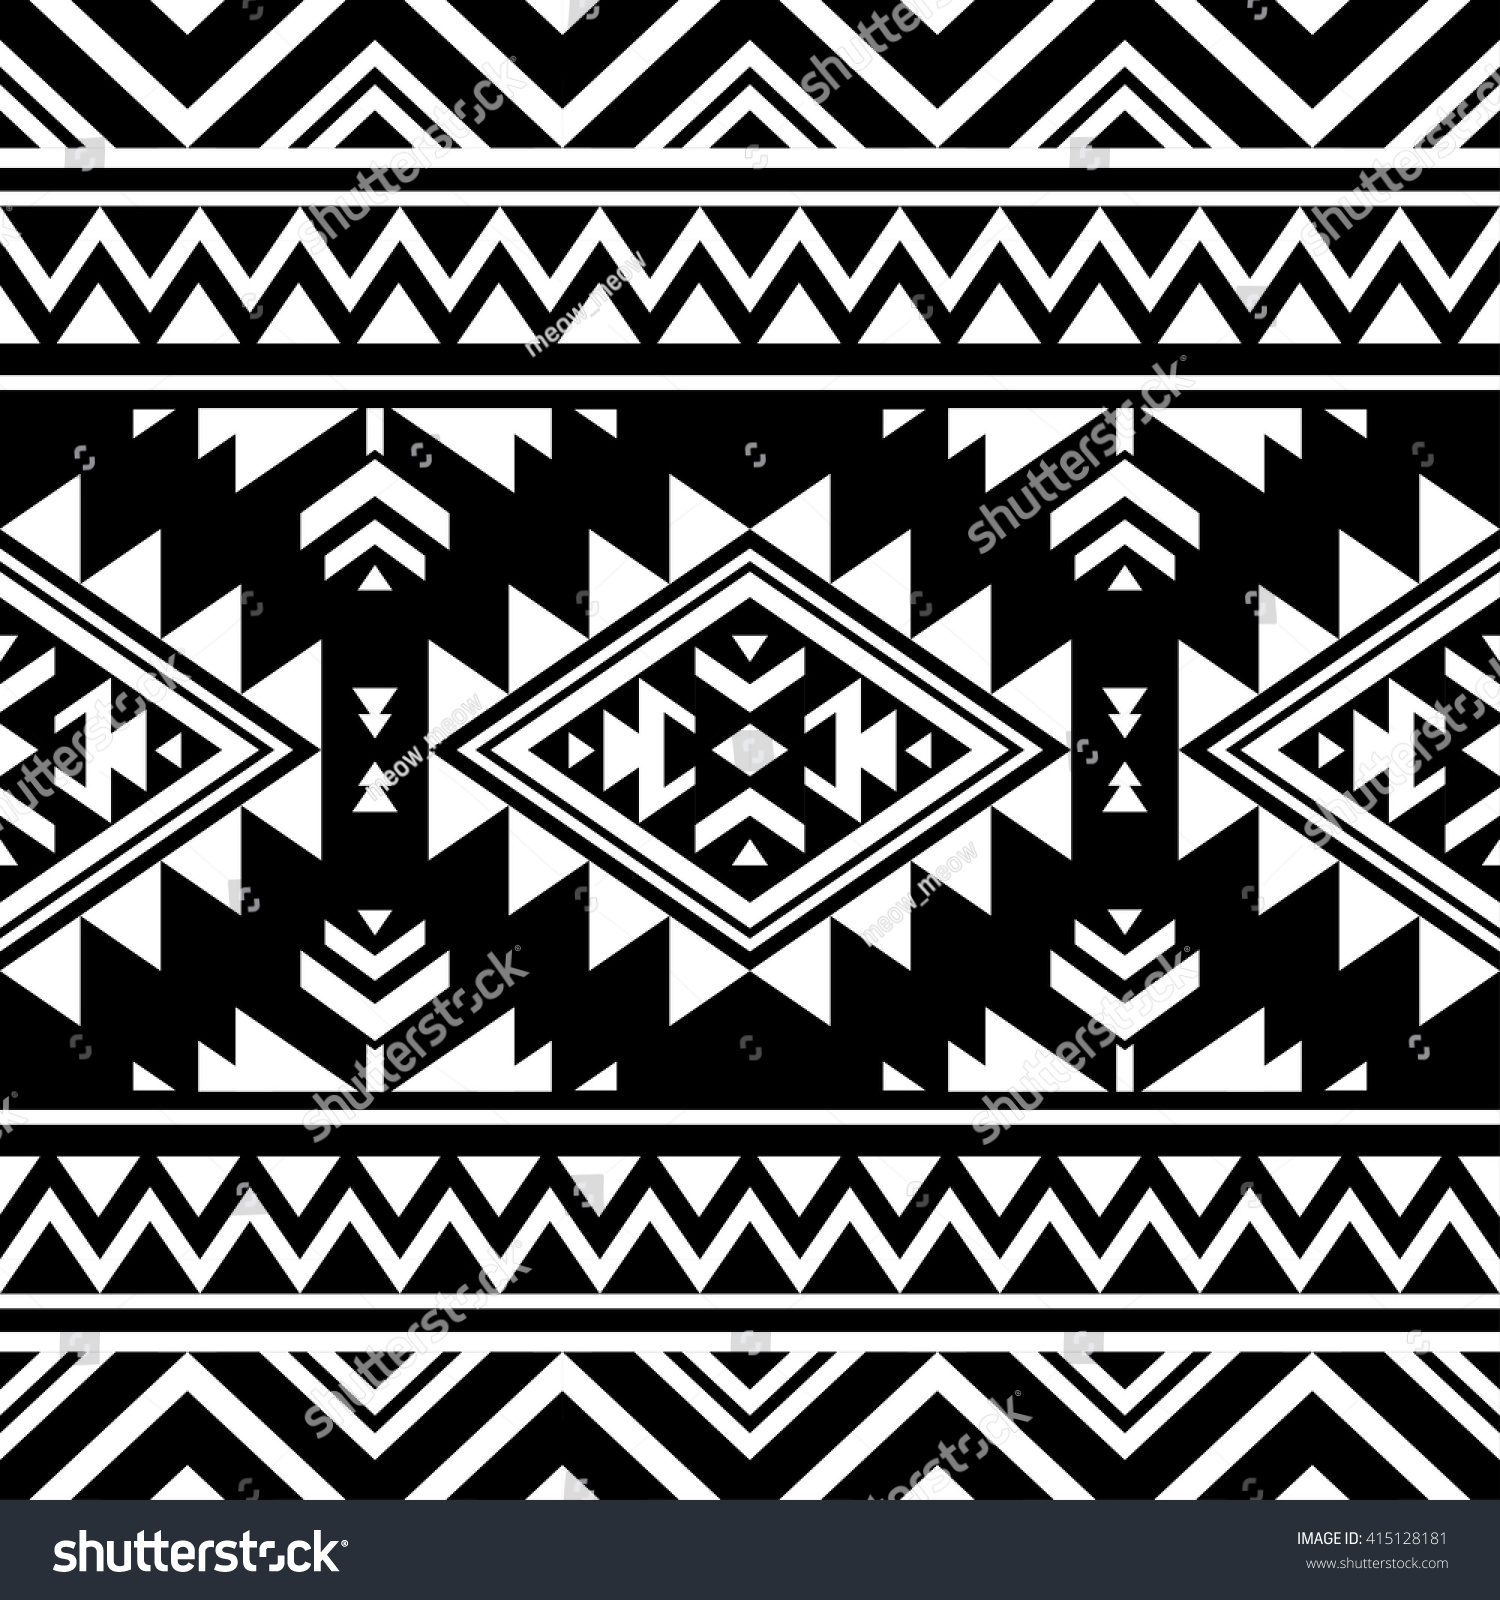 Black And White Color Tribal Navajo Vector Seamless Pattern. Aztec ...